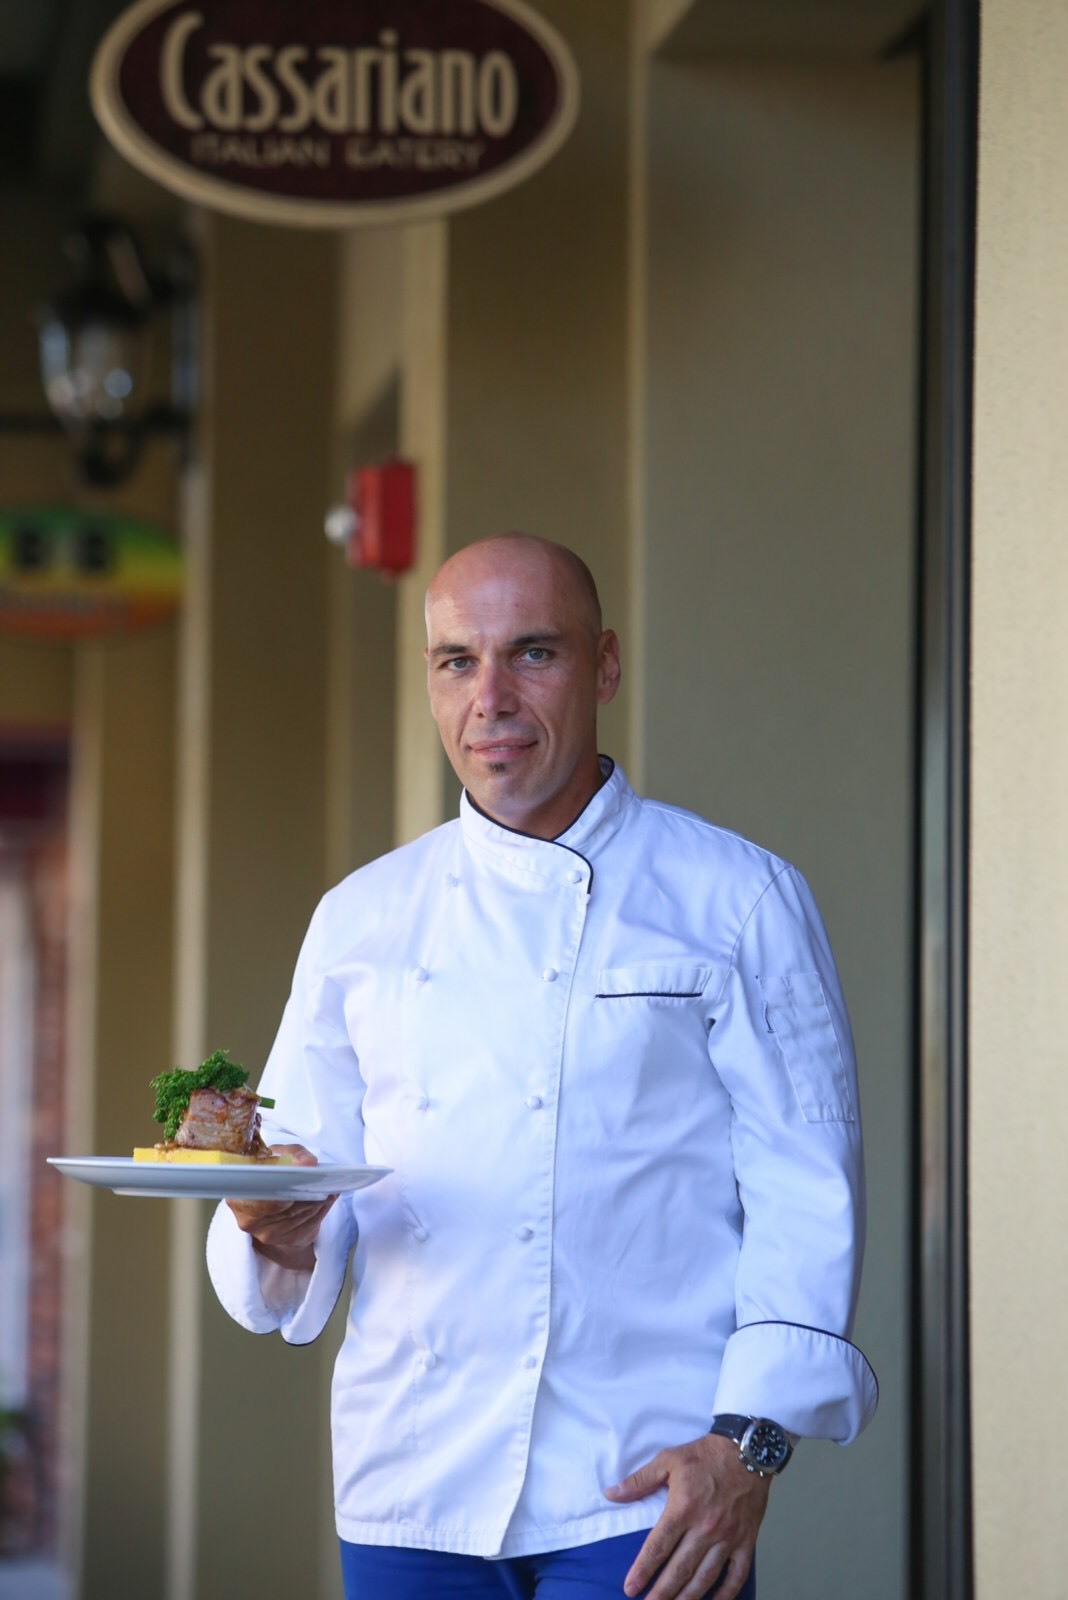 Chef Antonio Pariano was born in Torino, Italy, where he attended the Culinary Institute of Torino. He owns both Cassariano locations with Luca Cassani of Milan. Photo courtesy Cassariano Italian Eatery